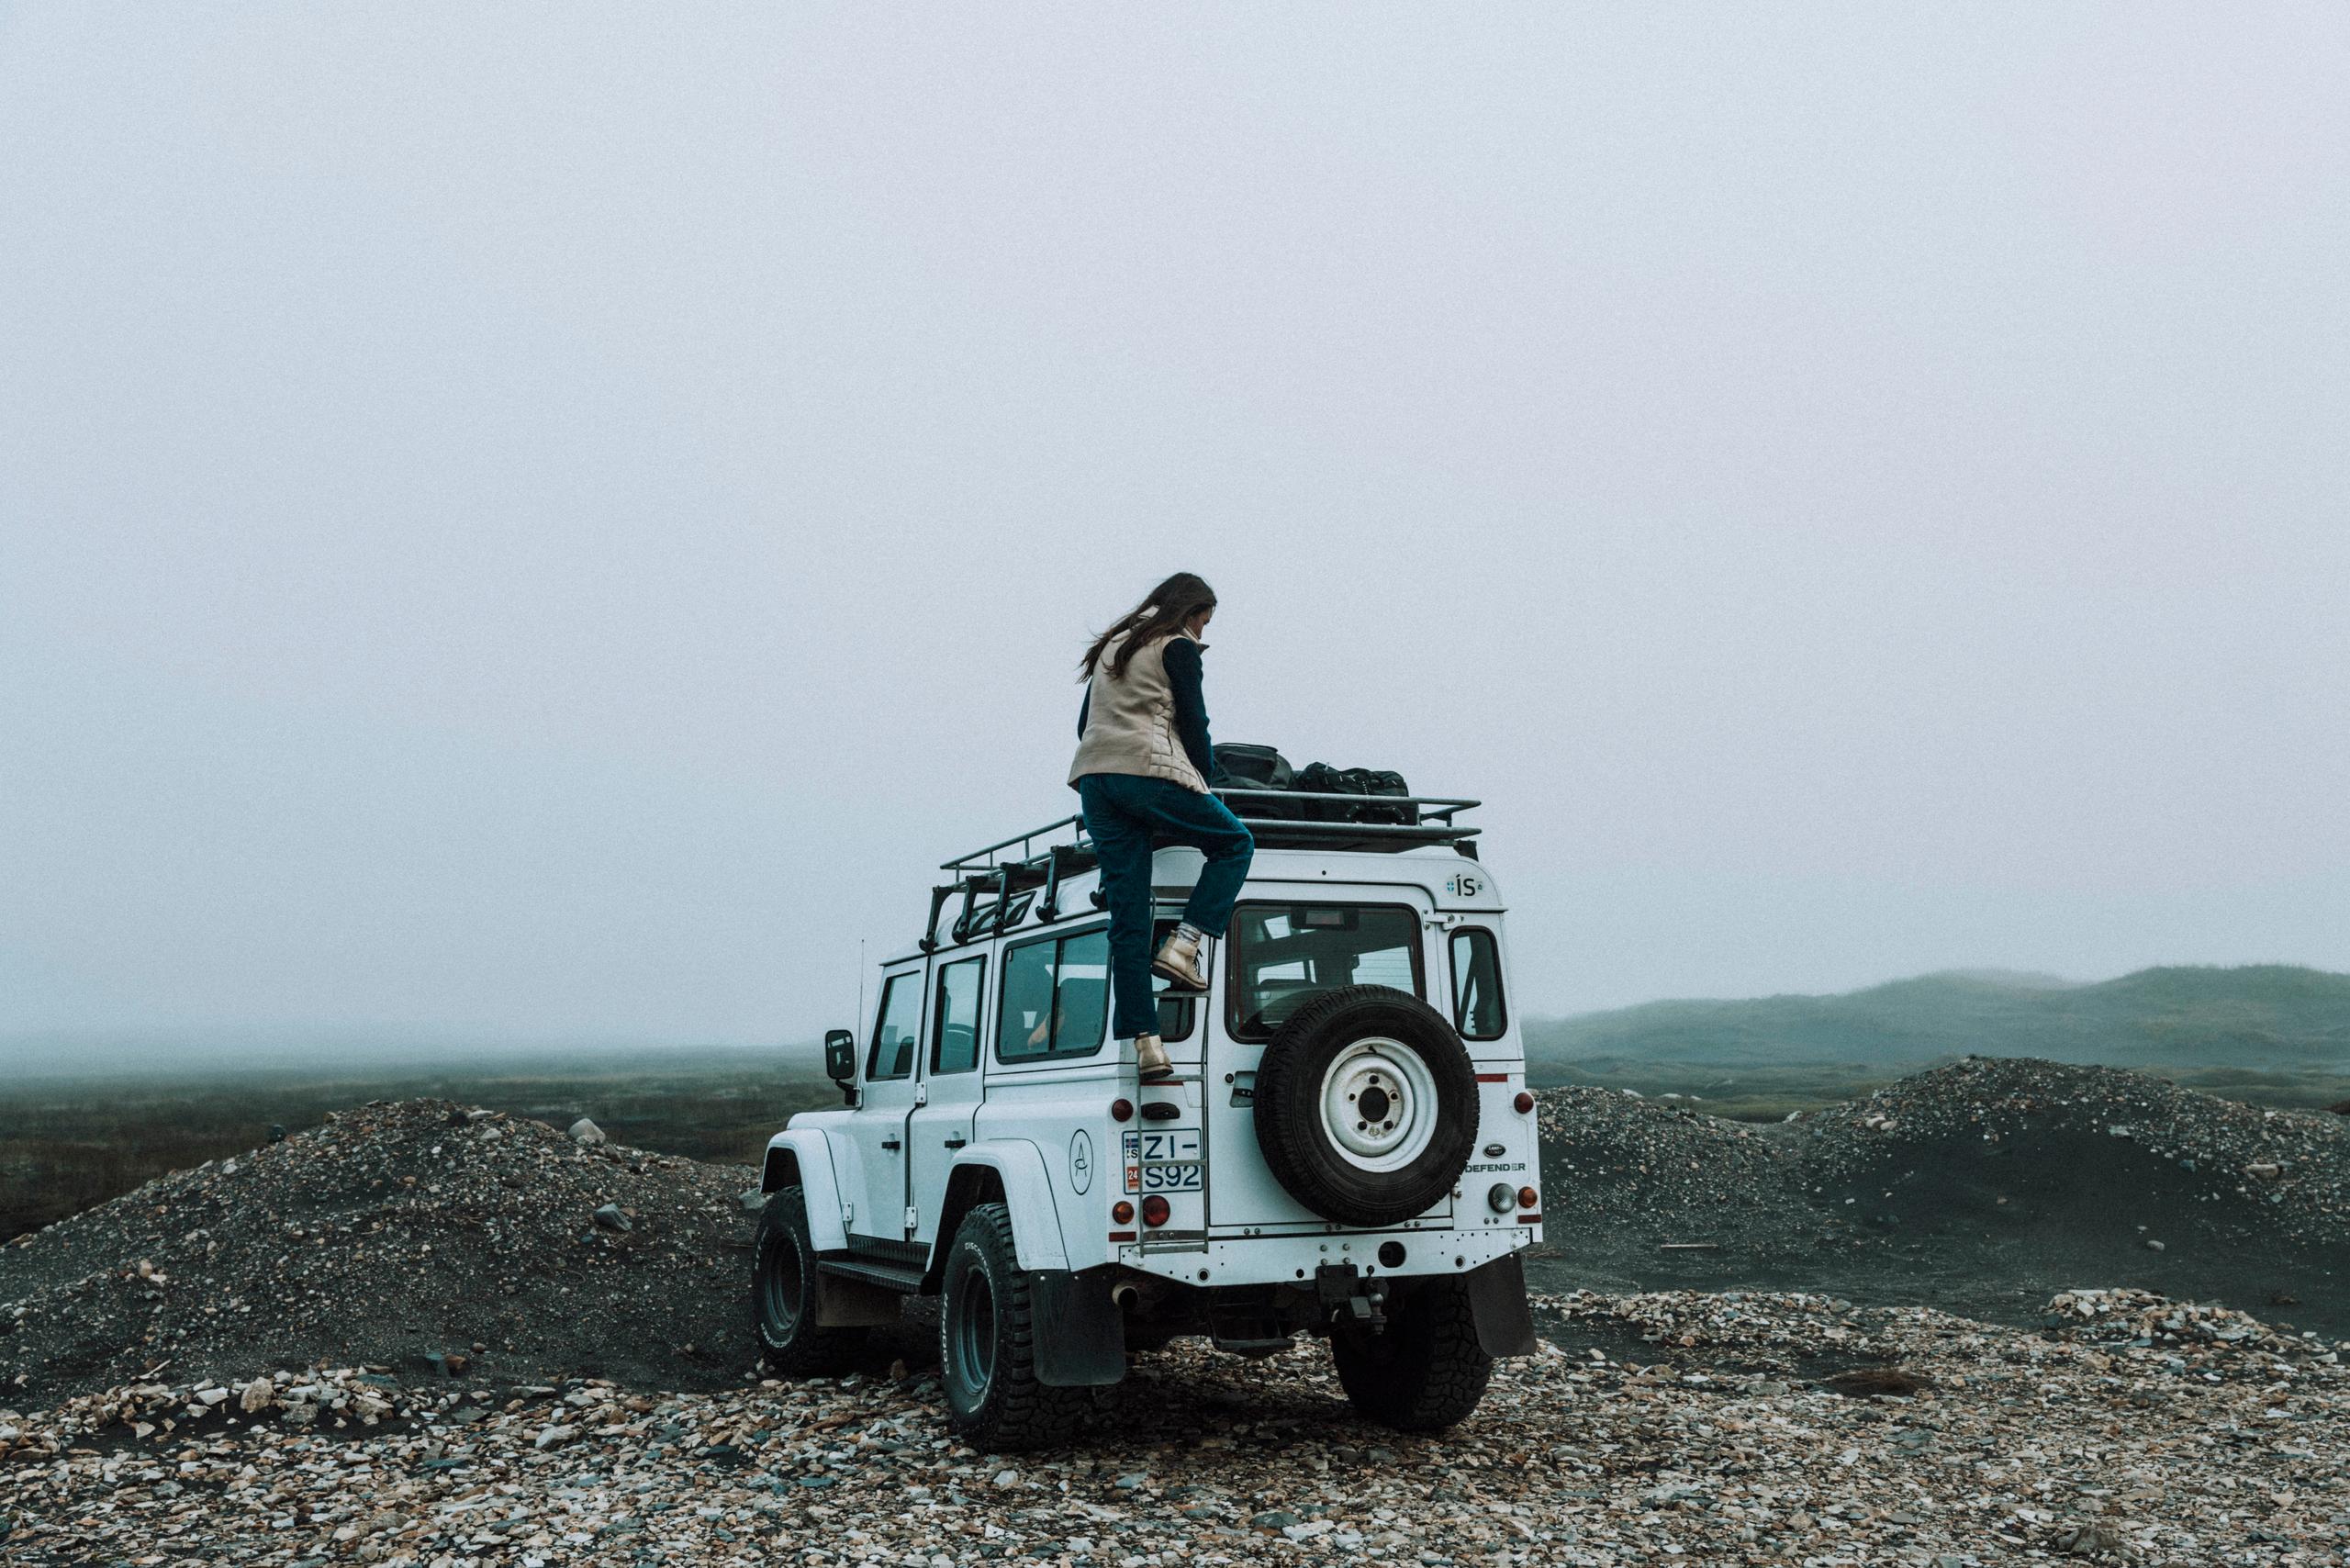 Julia wearing Phase Vest climbing on top of a Defender 110.